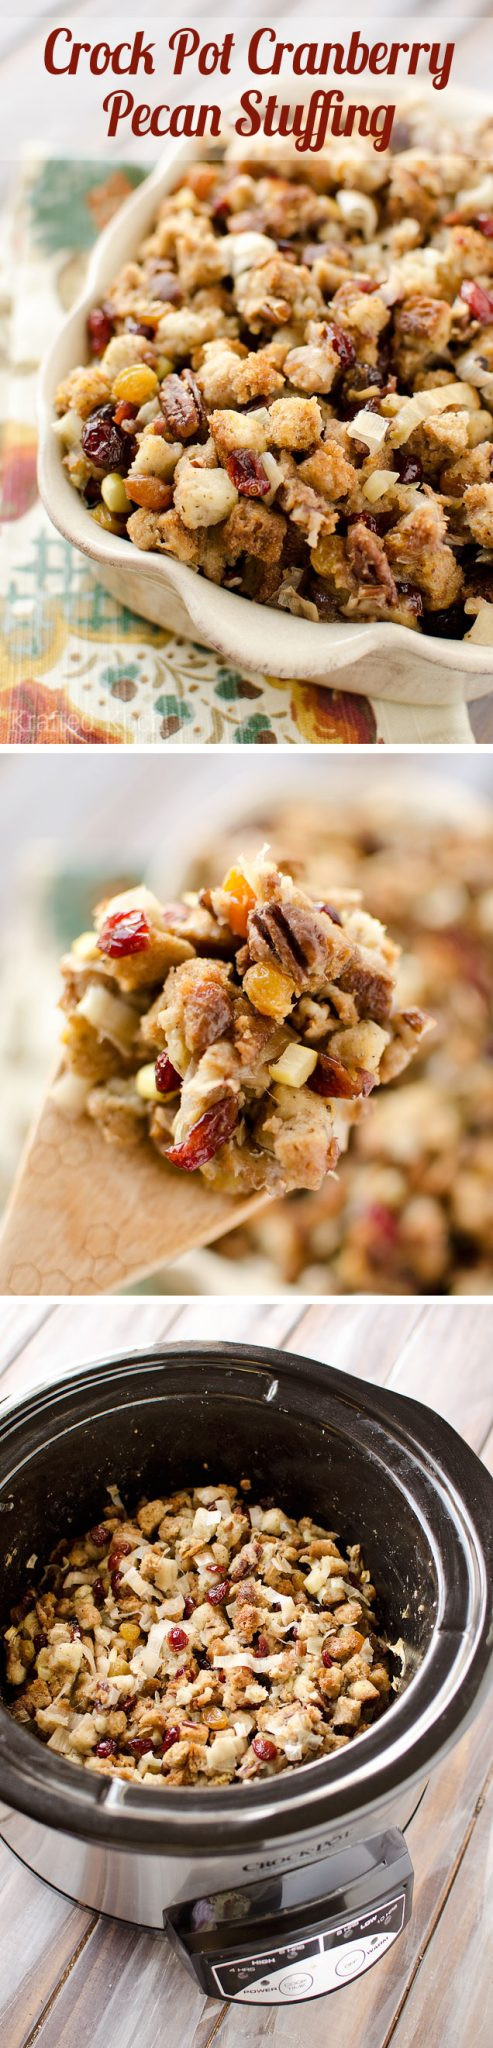 Slow Cooker Thanksgiving Side Dishes
 Crock Pot Cranberry Pecan Stuffing